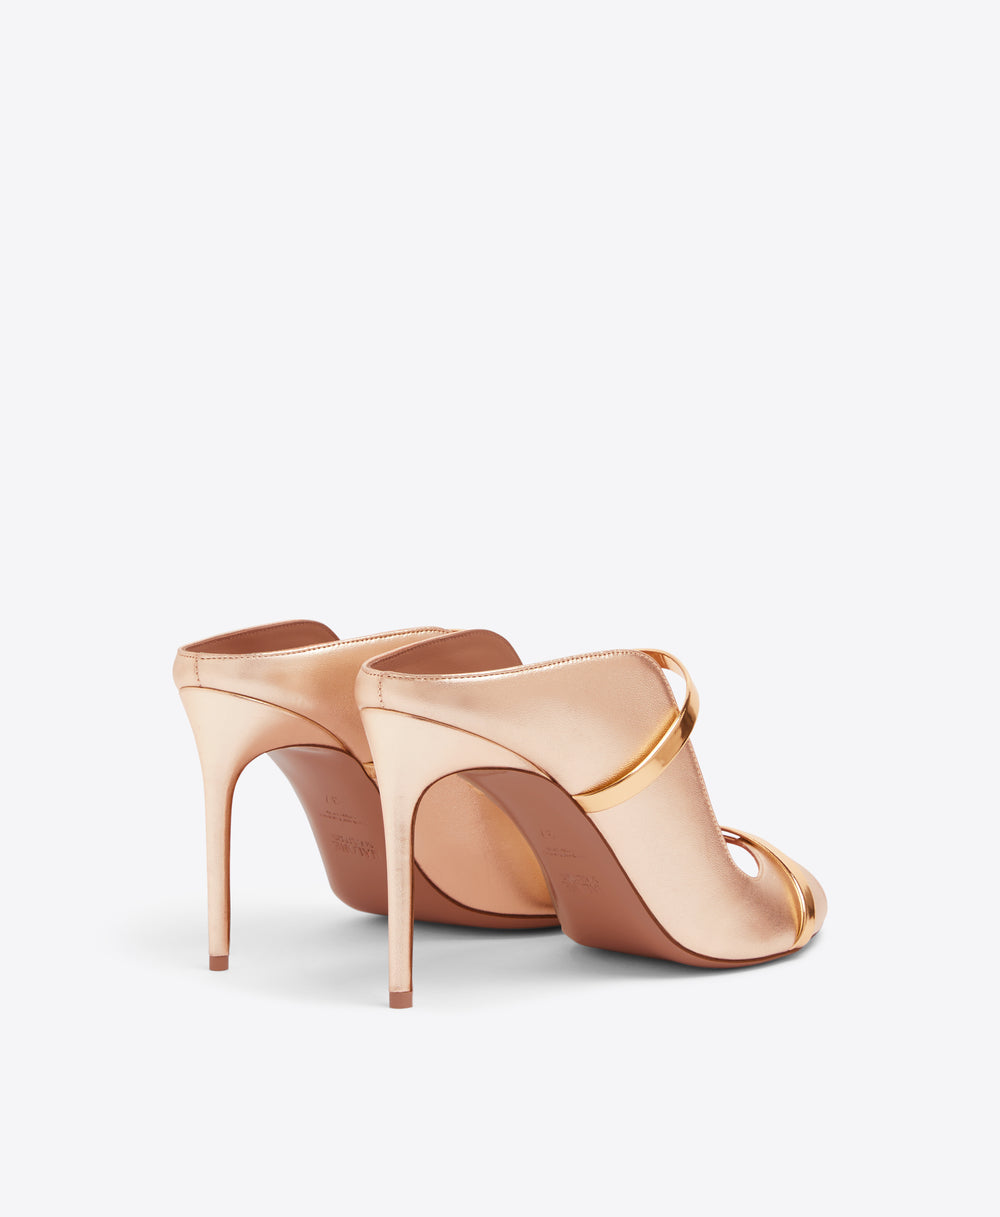 Noah 90 Rose Gold Leather Heeled Sandals Malone Souliers